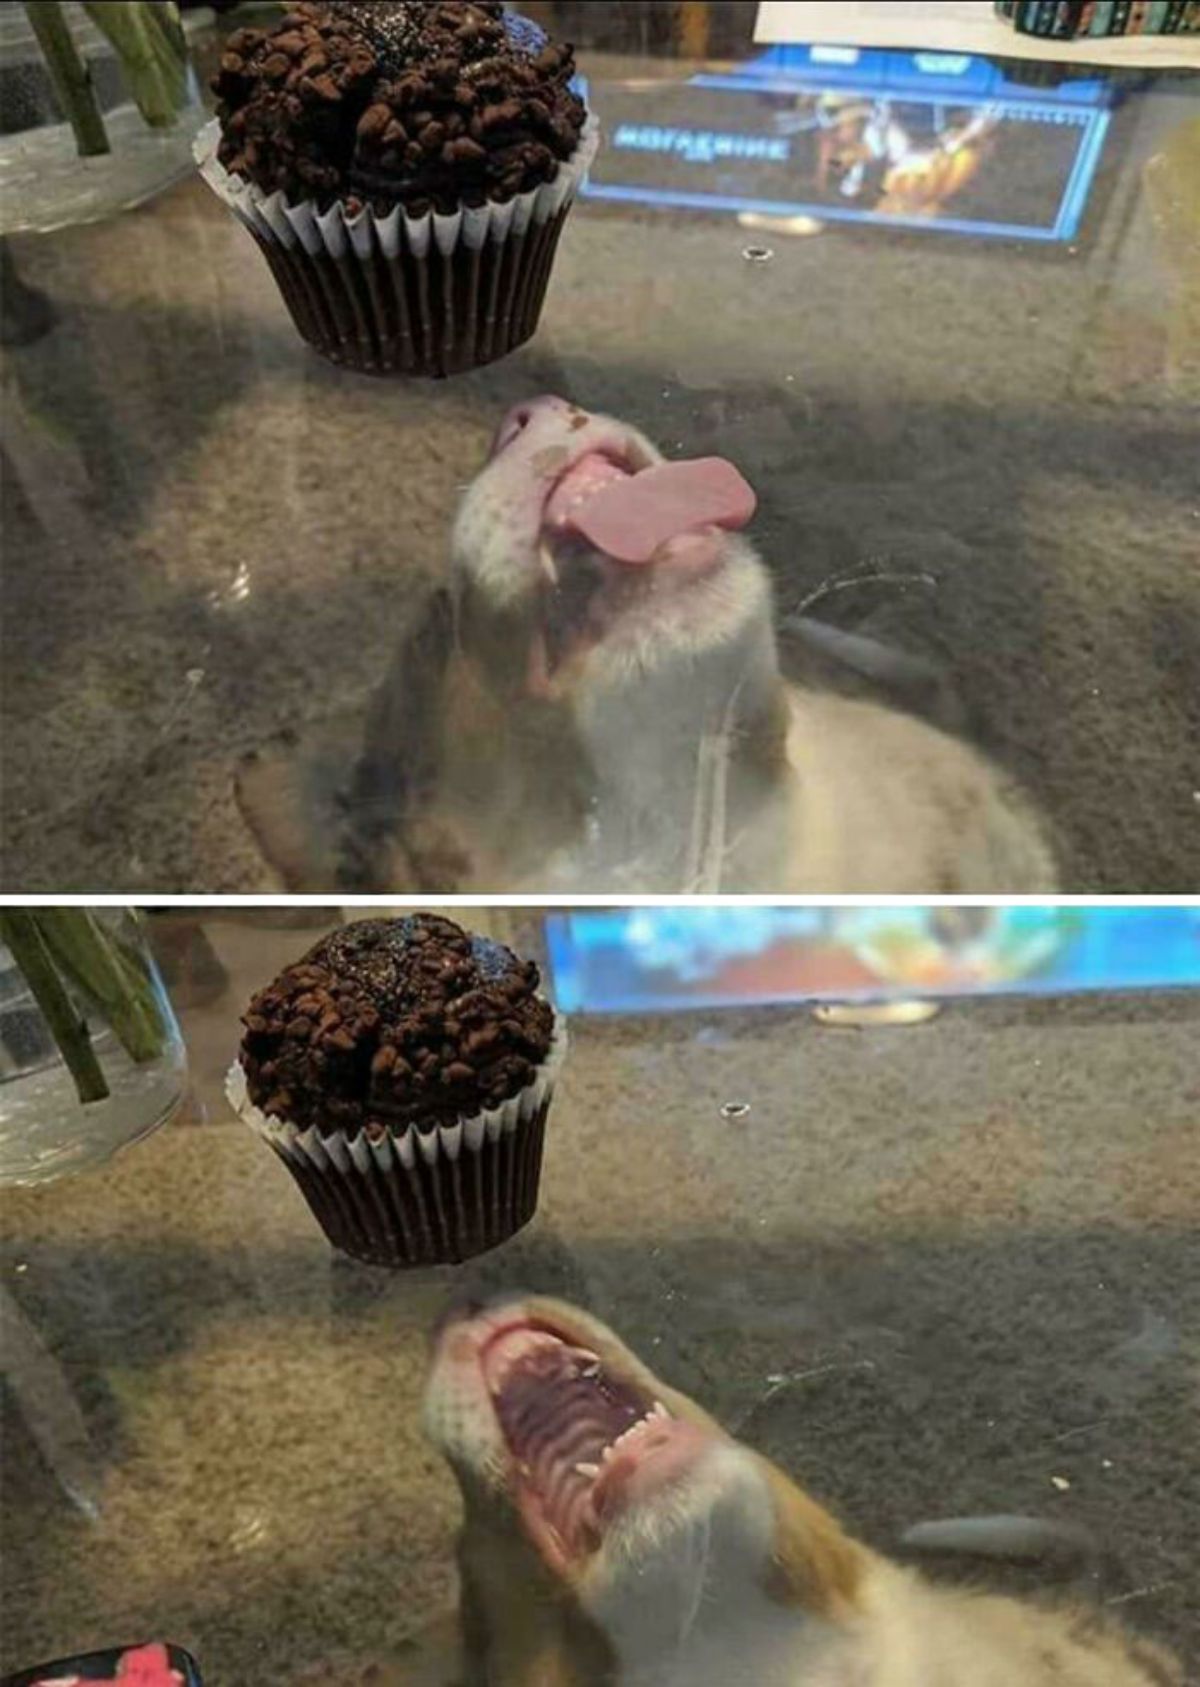 fluffy brown and white dog under a table trying to eat a chocolate muffin on a glass table